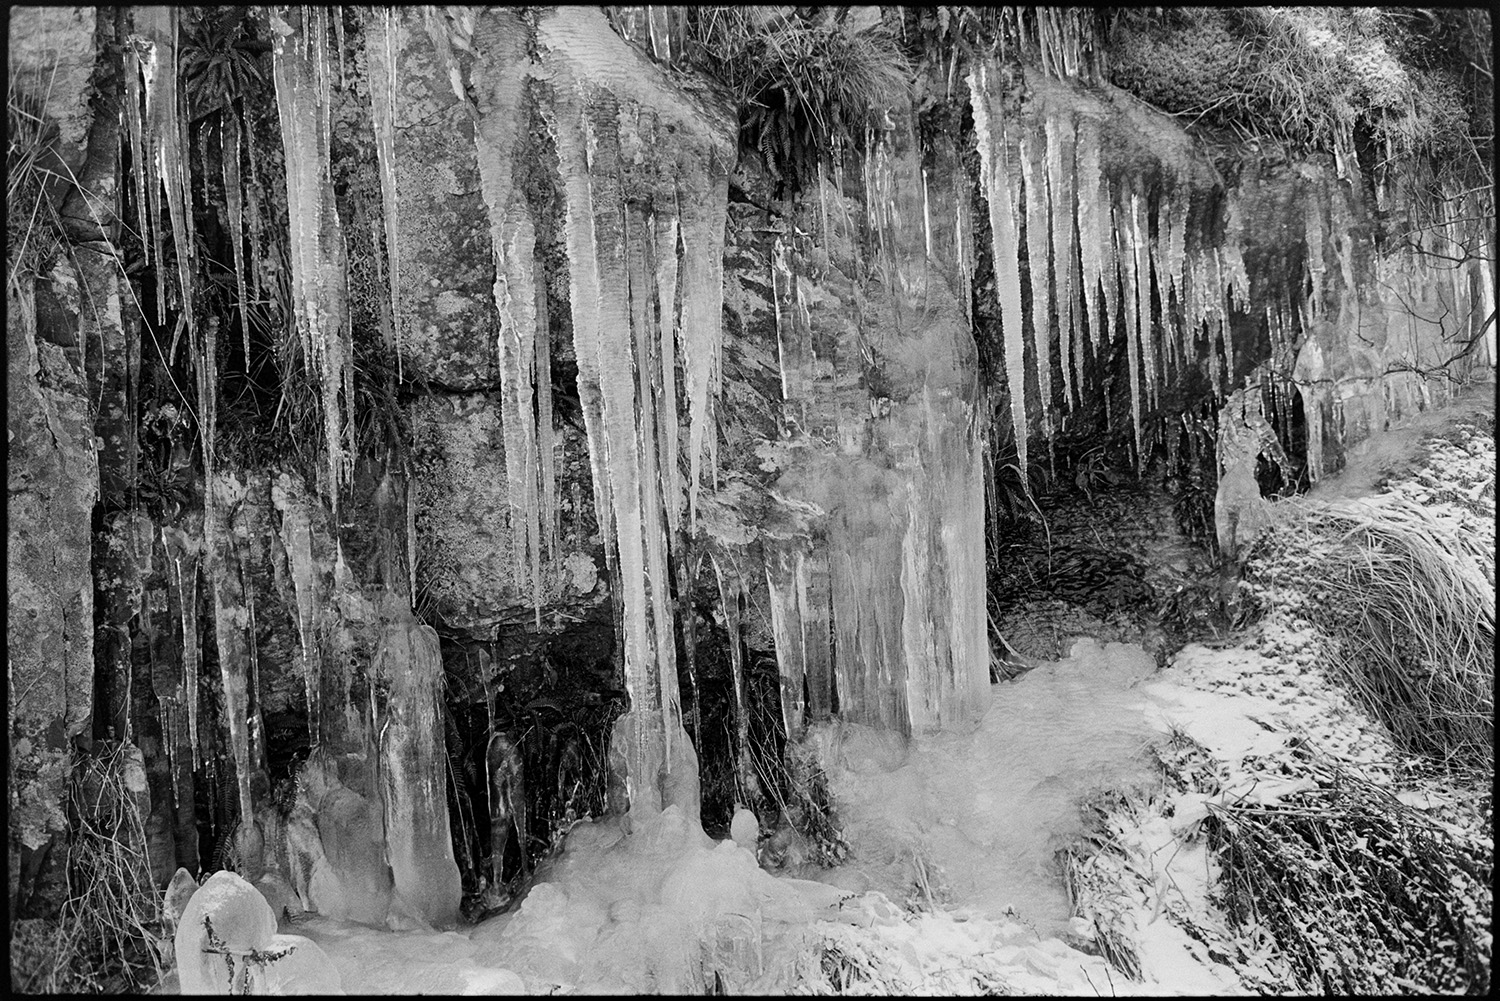 Snow, icicles at moor roadside.
[Snow and icicles on the roadside near Simonsbath on Exmoor.]